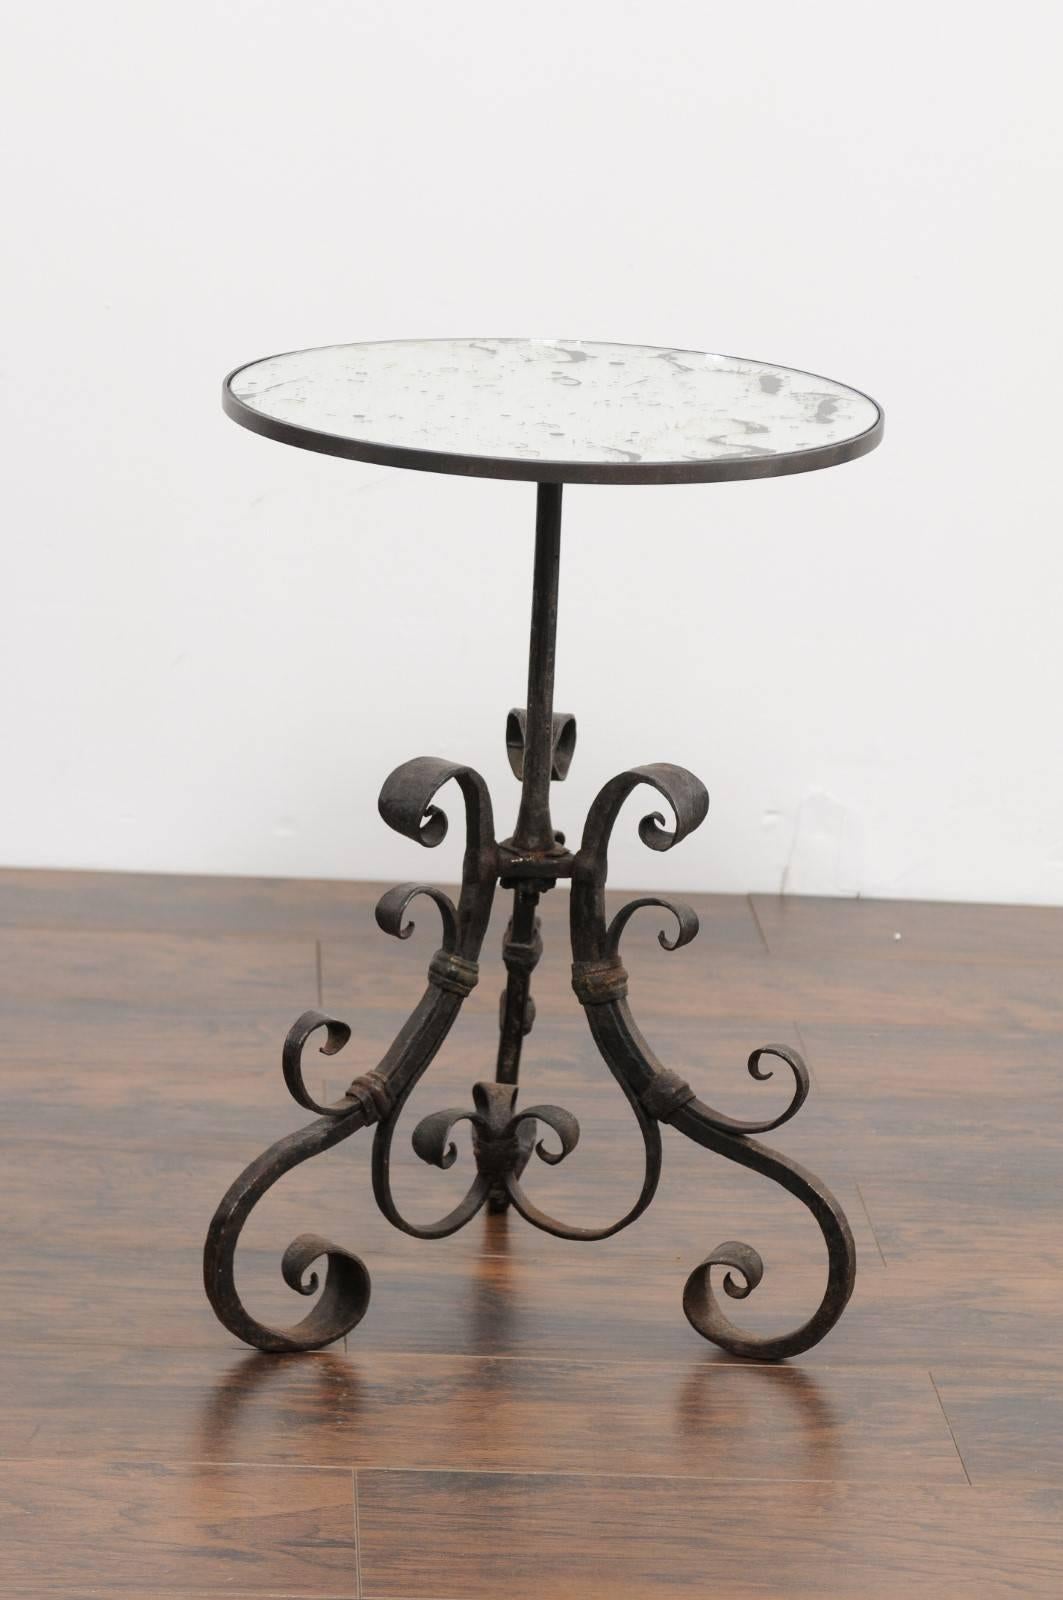 An Italian wrought iron round pedestal side table with antique mirrored top from the second half of the 19th century. This Italian side table features a circular top supporting a nicely aged antique mirror. The table is raised on an exquisite